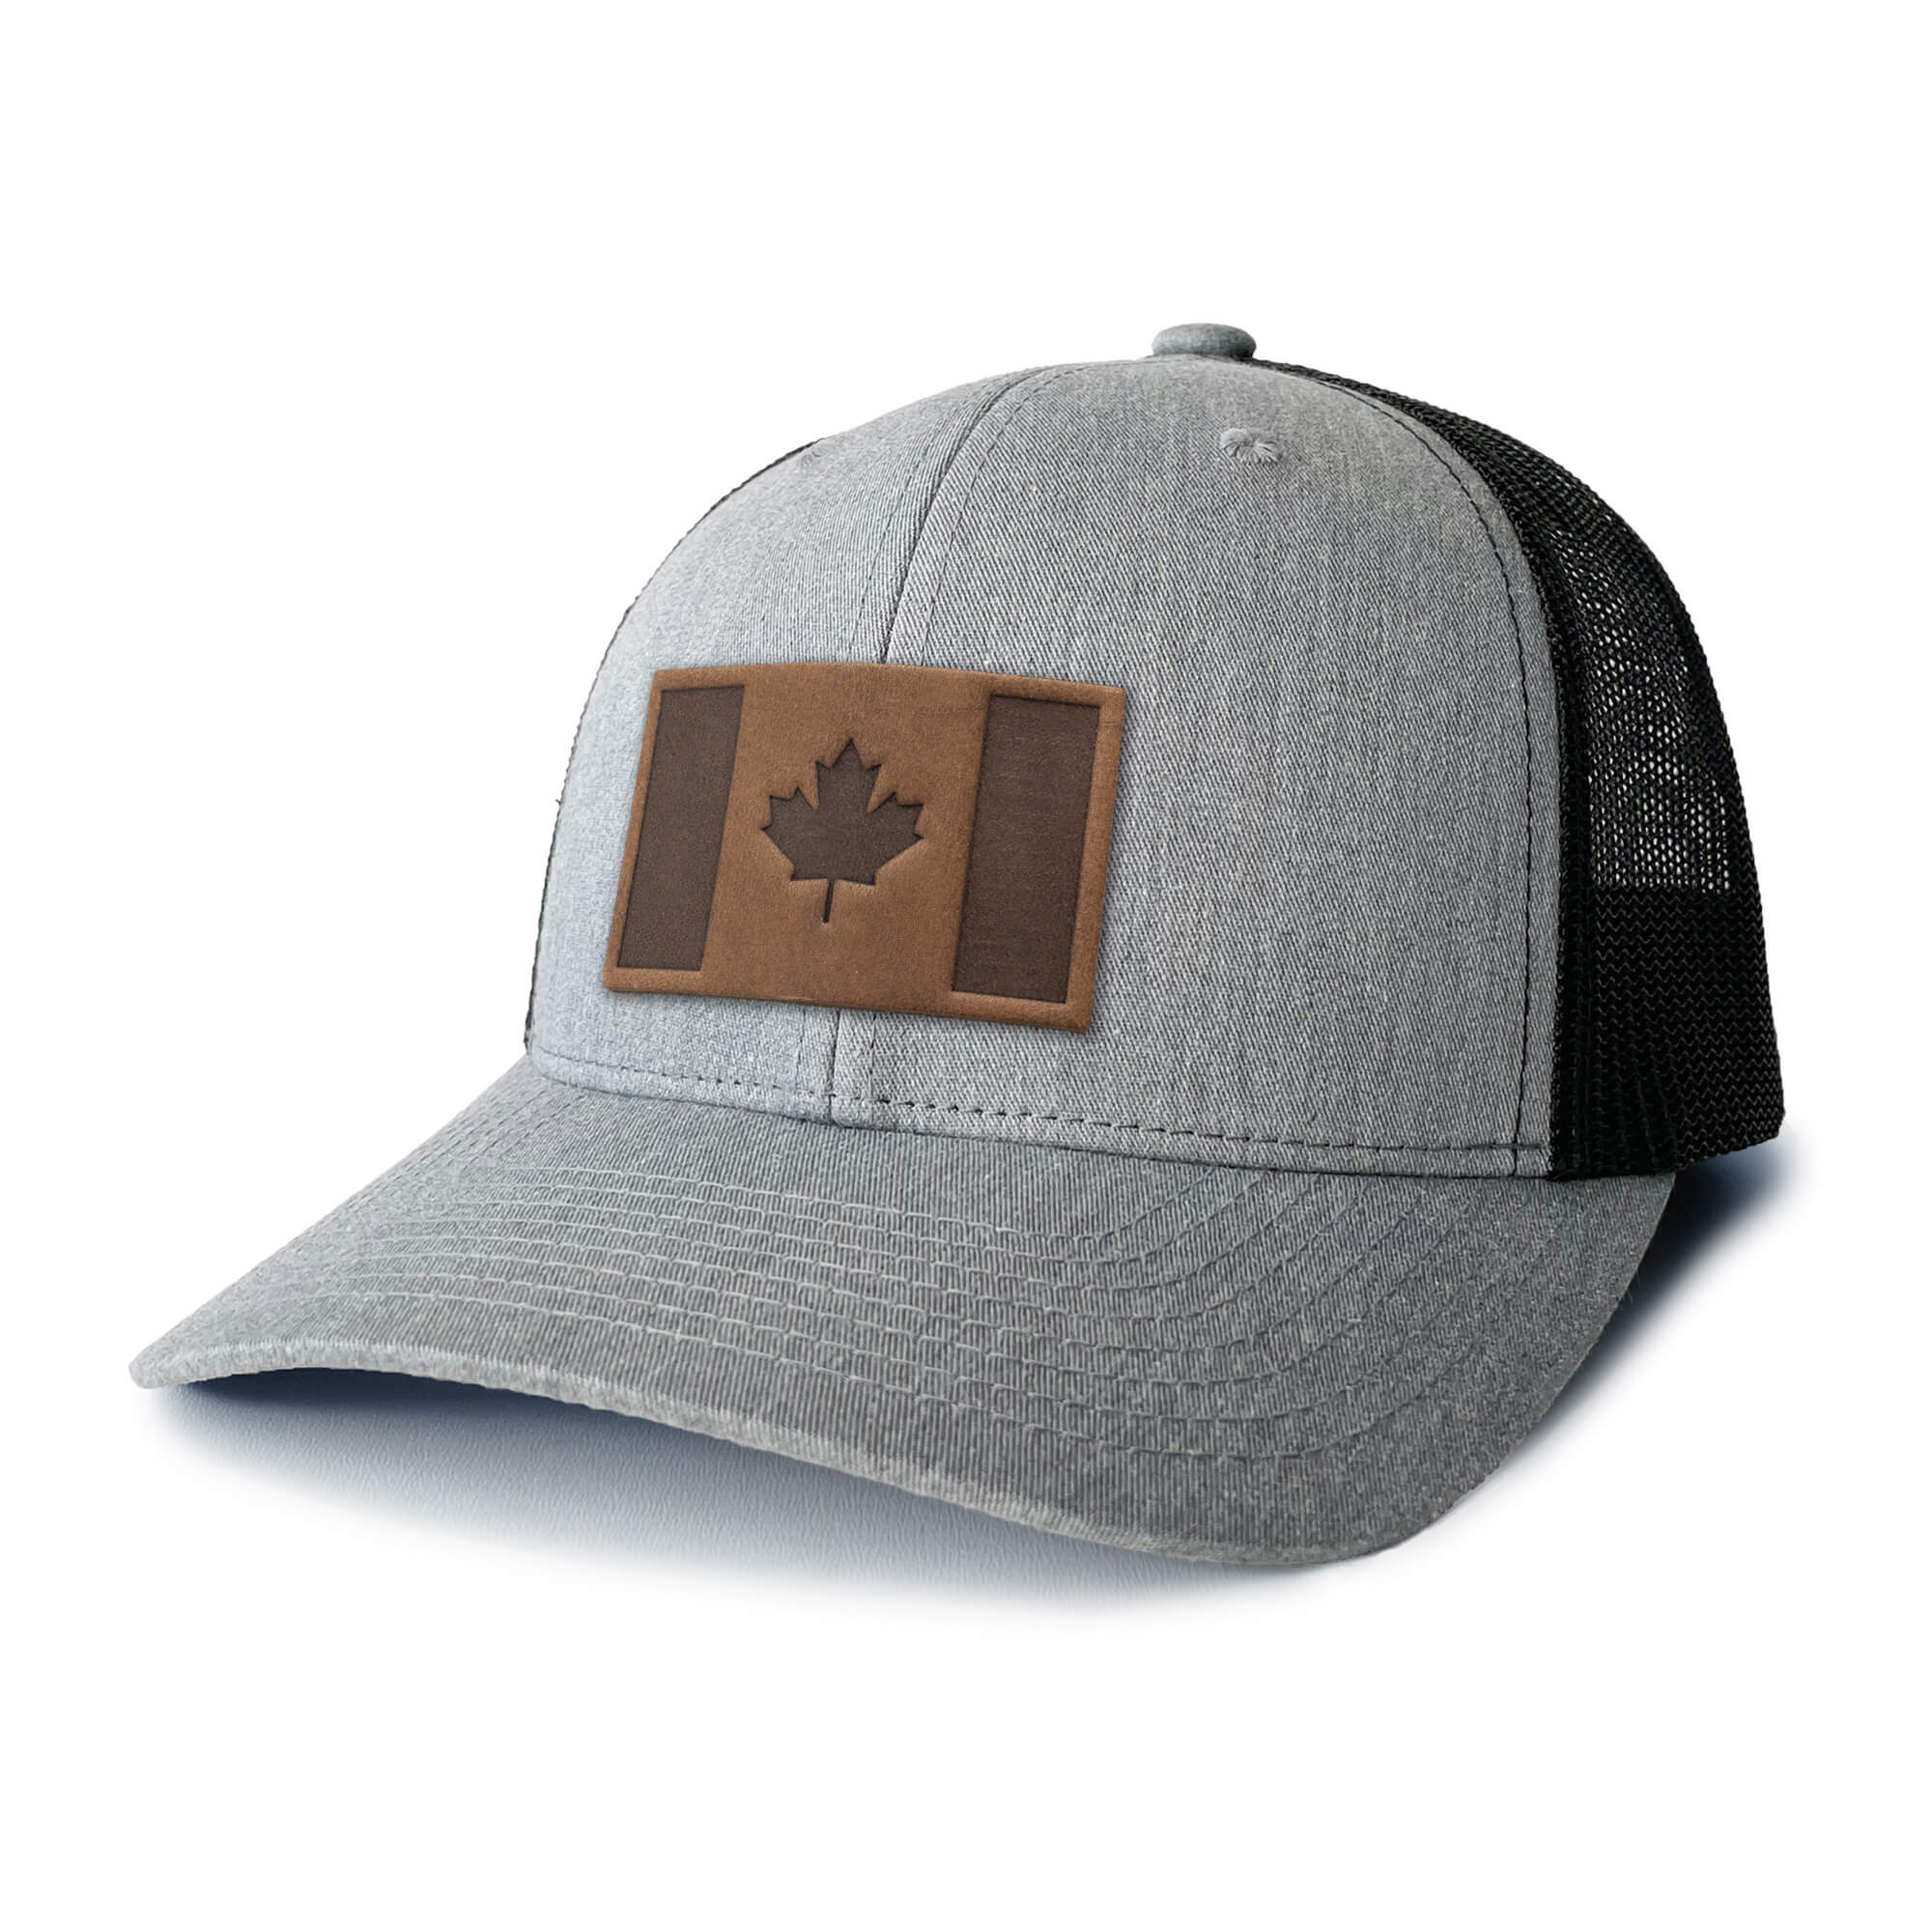 Heather Grey and white trucker hat with full-grain leather patch of Canada Flag | BLACK-002-009, CHARC-002-009, NAVY-002-009, HGREY-002-009, MOSS-002-009, BROWN-002-009, RED-002-009